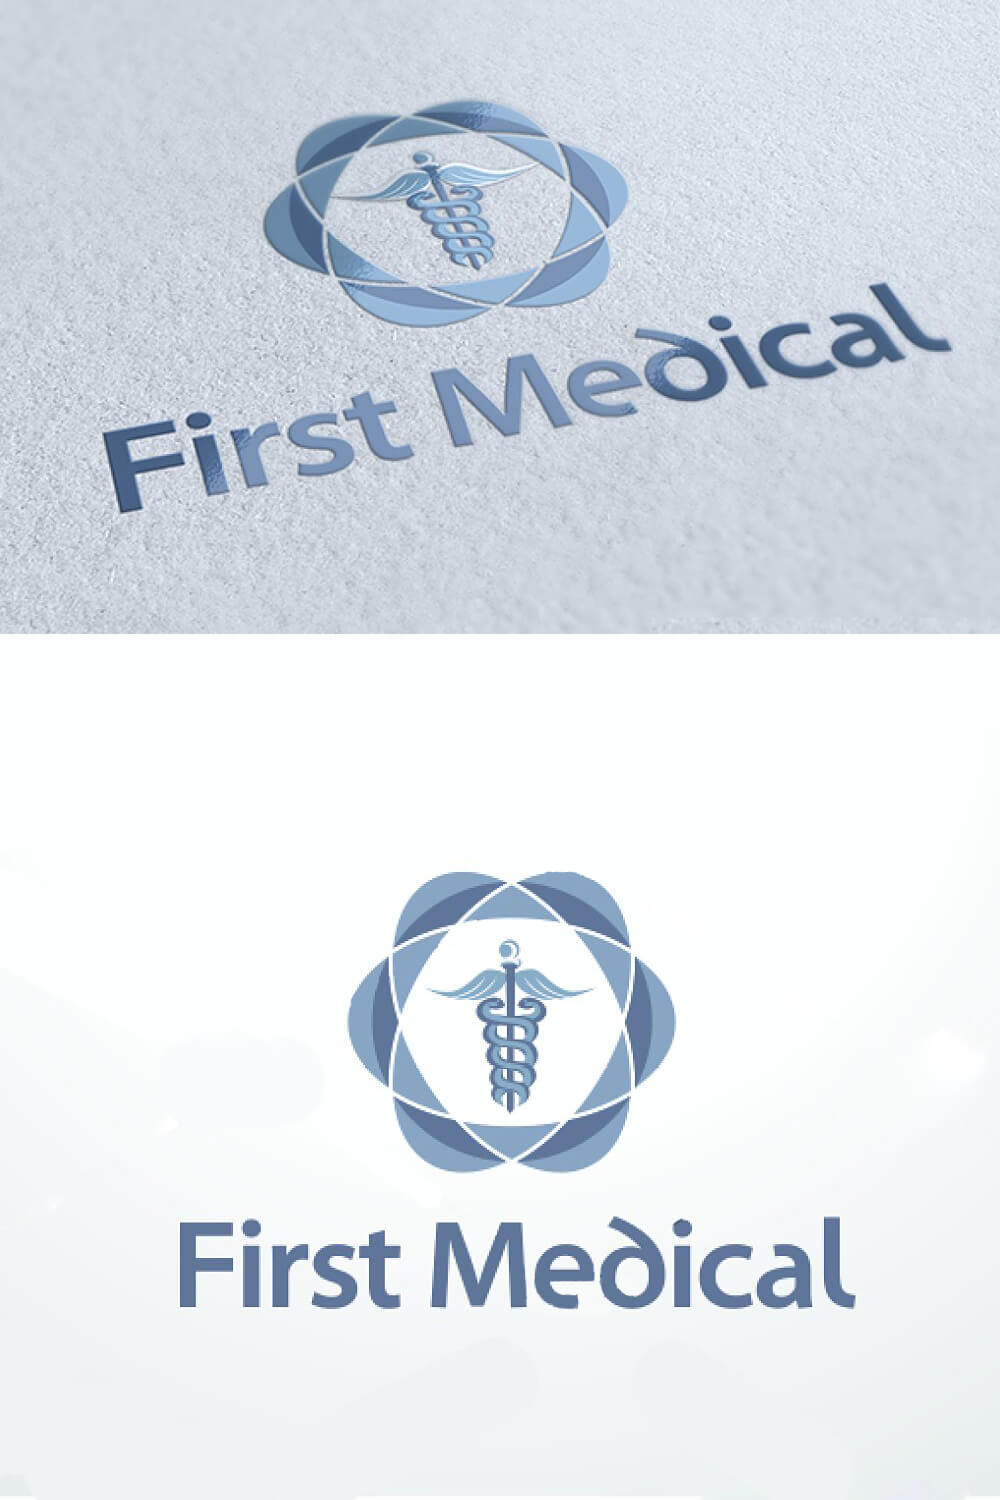 Medical logos on blue and white backgrounds.